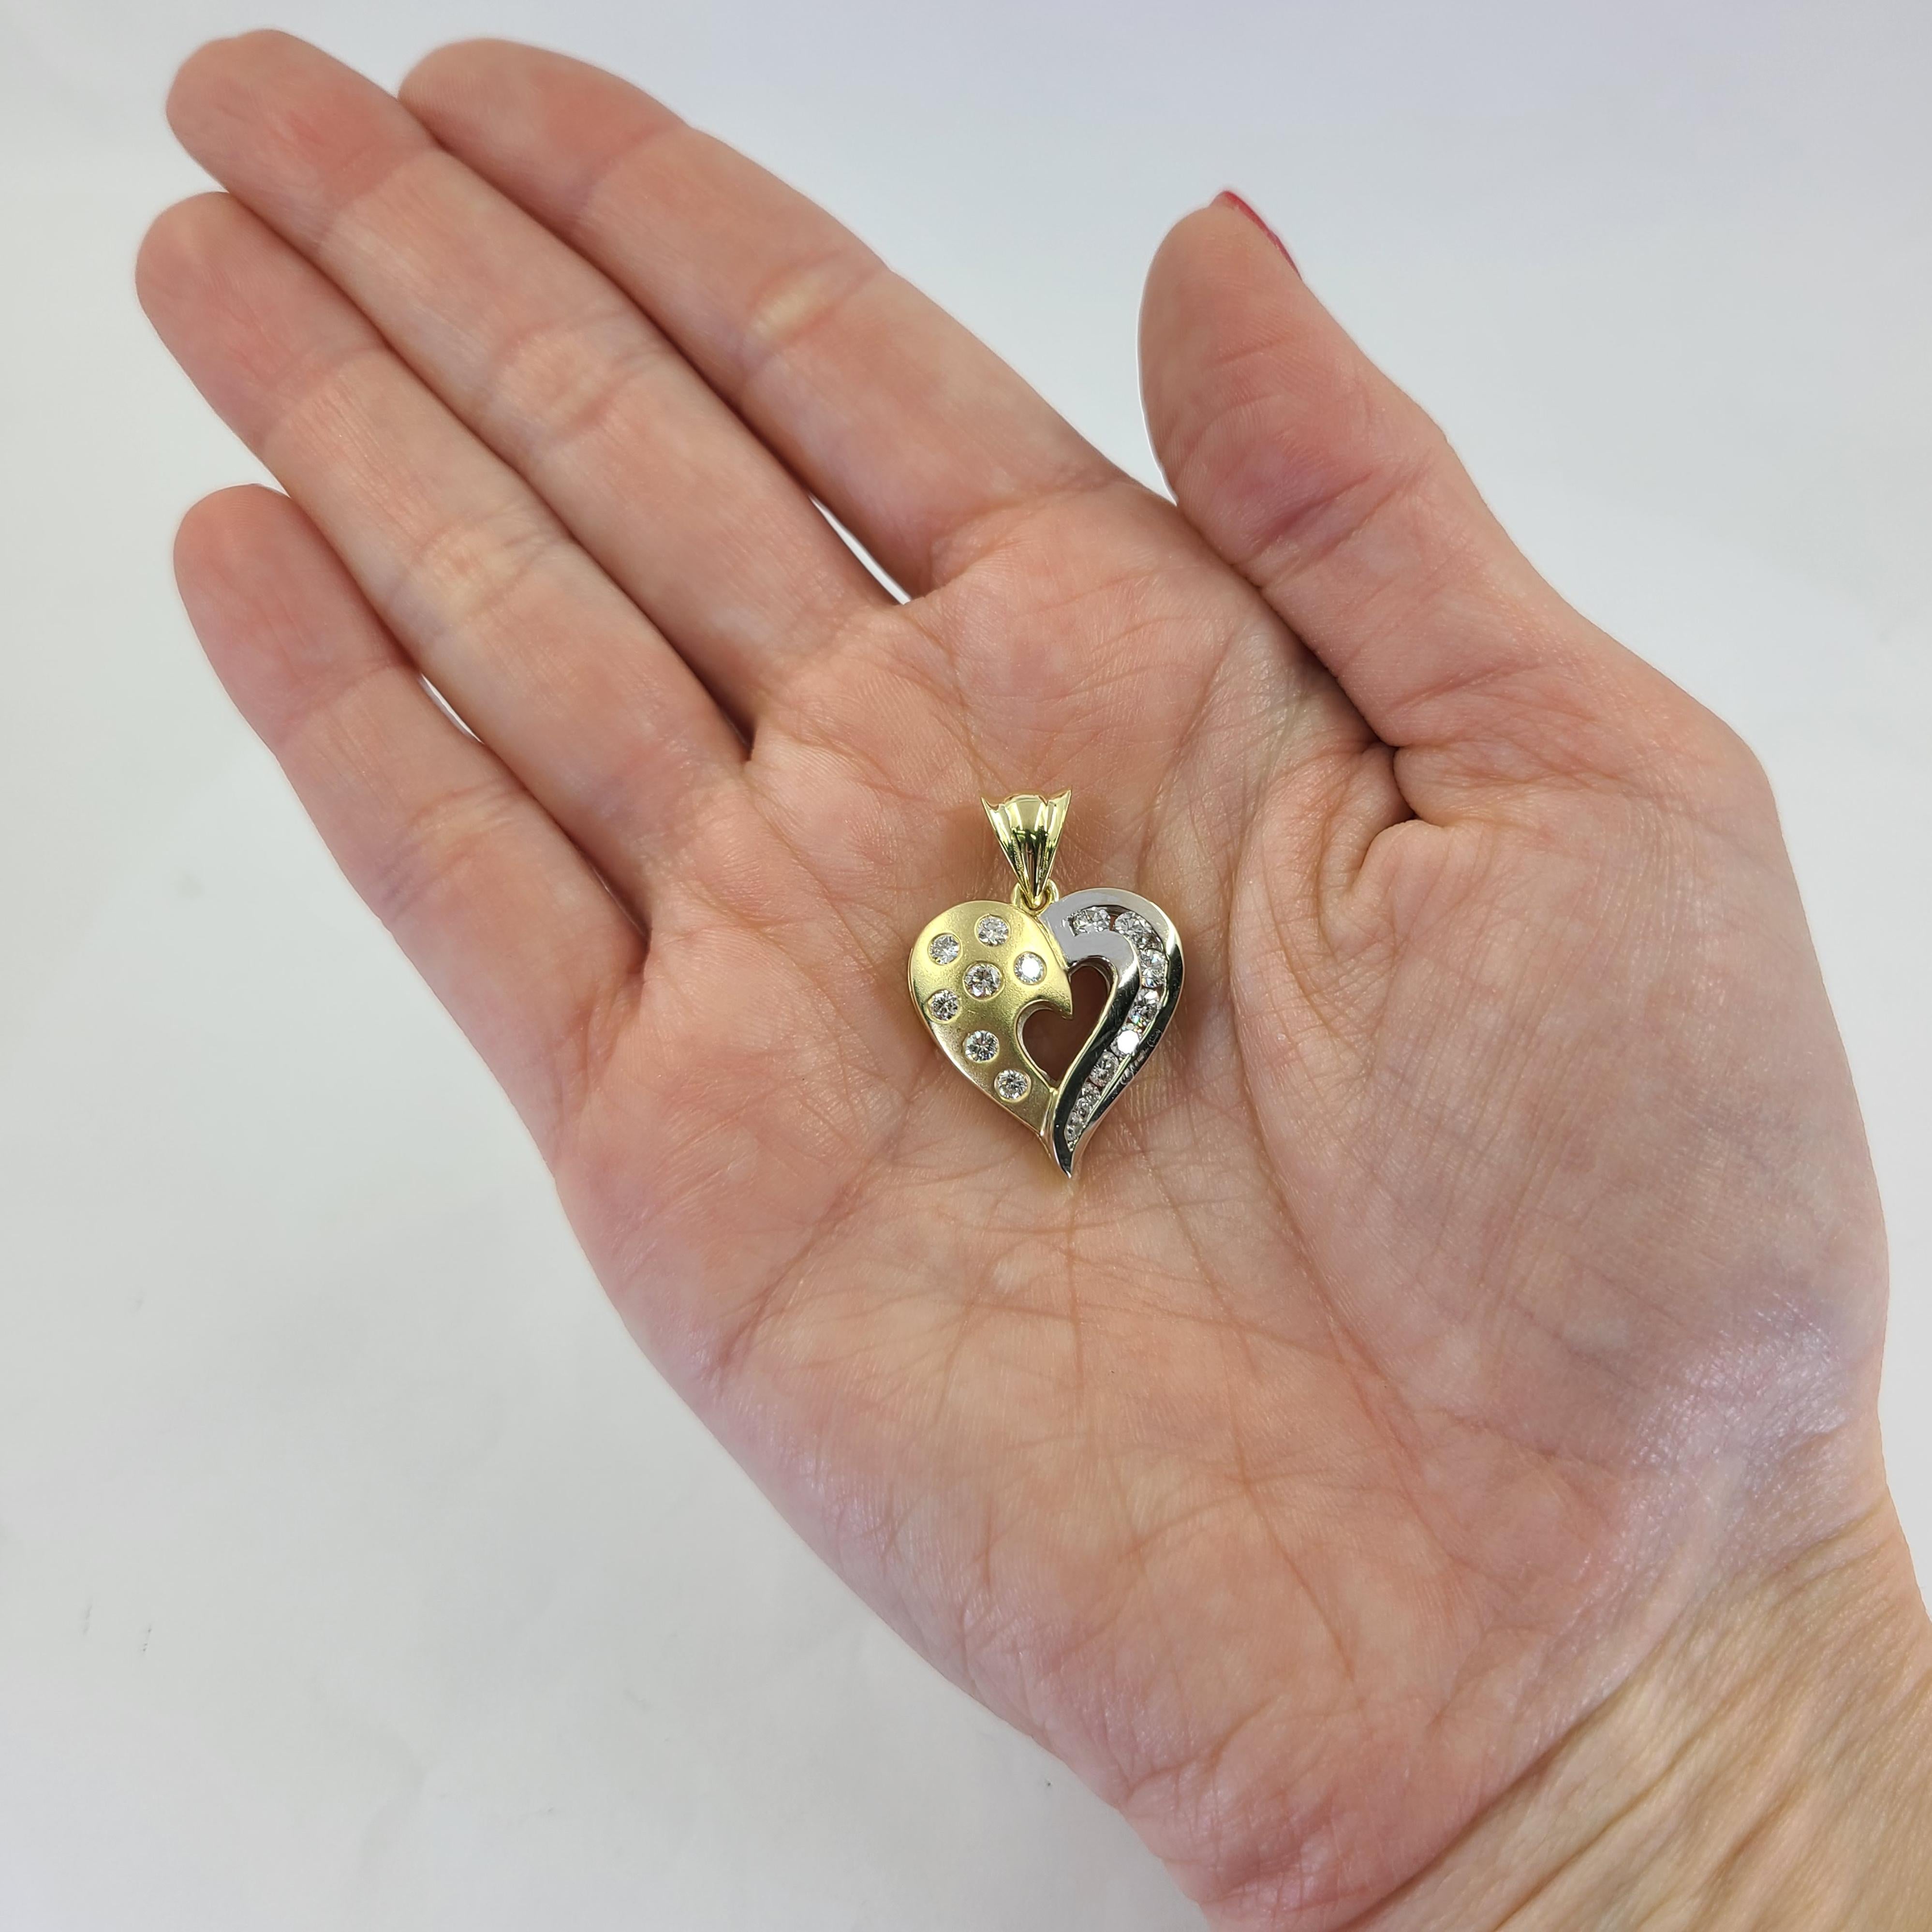 18 Karat White and Yellow Gold Matte Finish Heart Pendant Featuring 15 Channel and Flush Set Round Brilliant Cut Diamonds of VS Clarity and G/H Color. 1 Inch Length. Finished Weight Is 8.5 Grams.